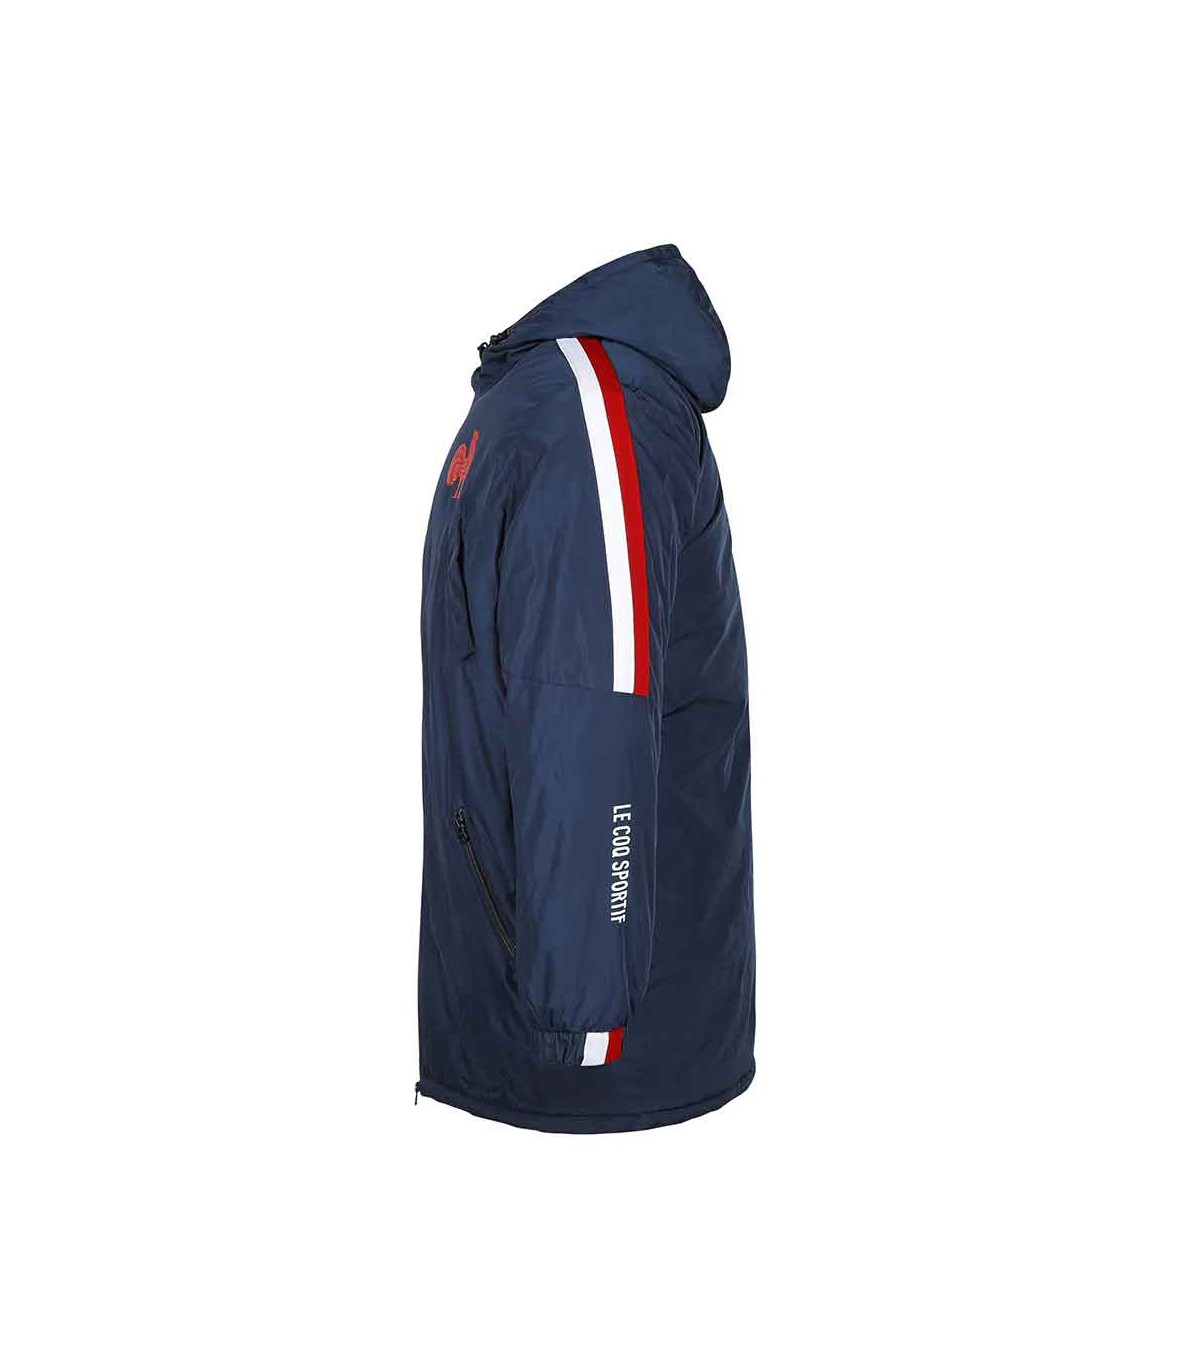 ADULT RUGBY FRENCH RUGBY PARKA 2020/2021 - LE COQ SPORTIF at shop R...